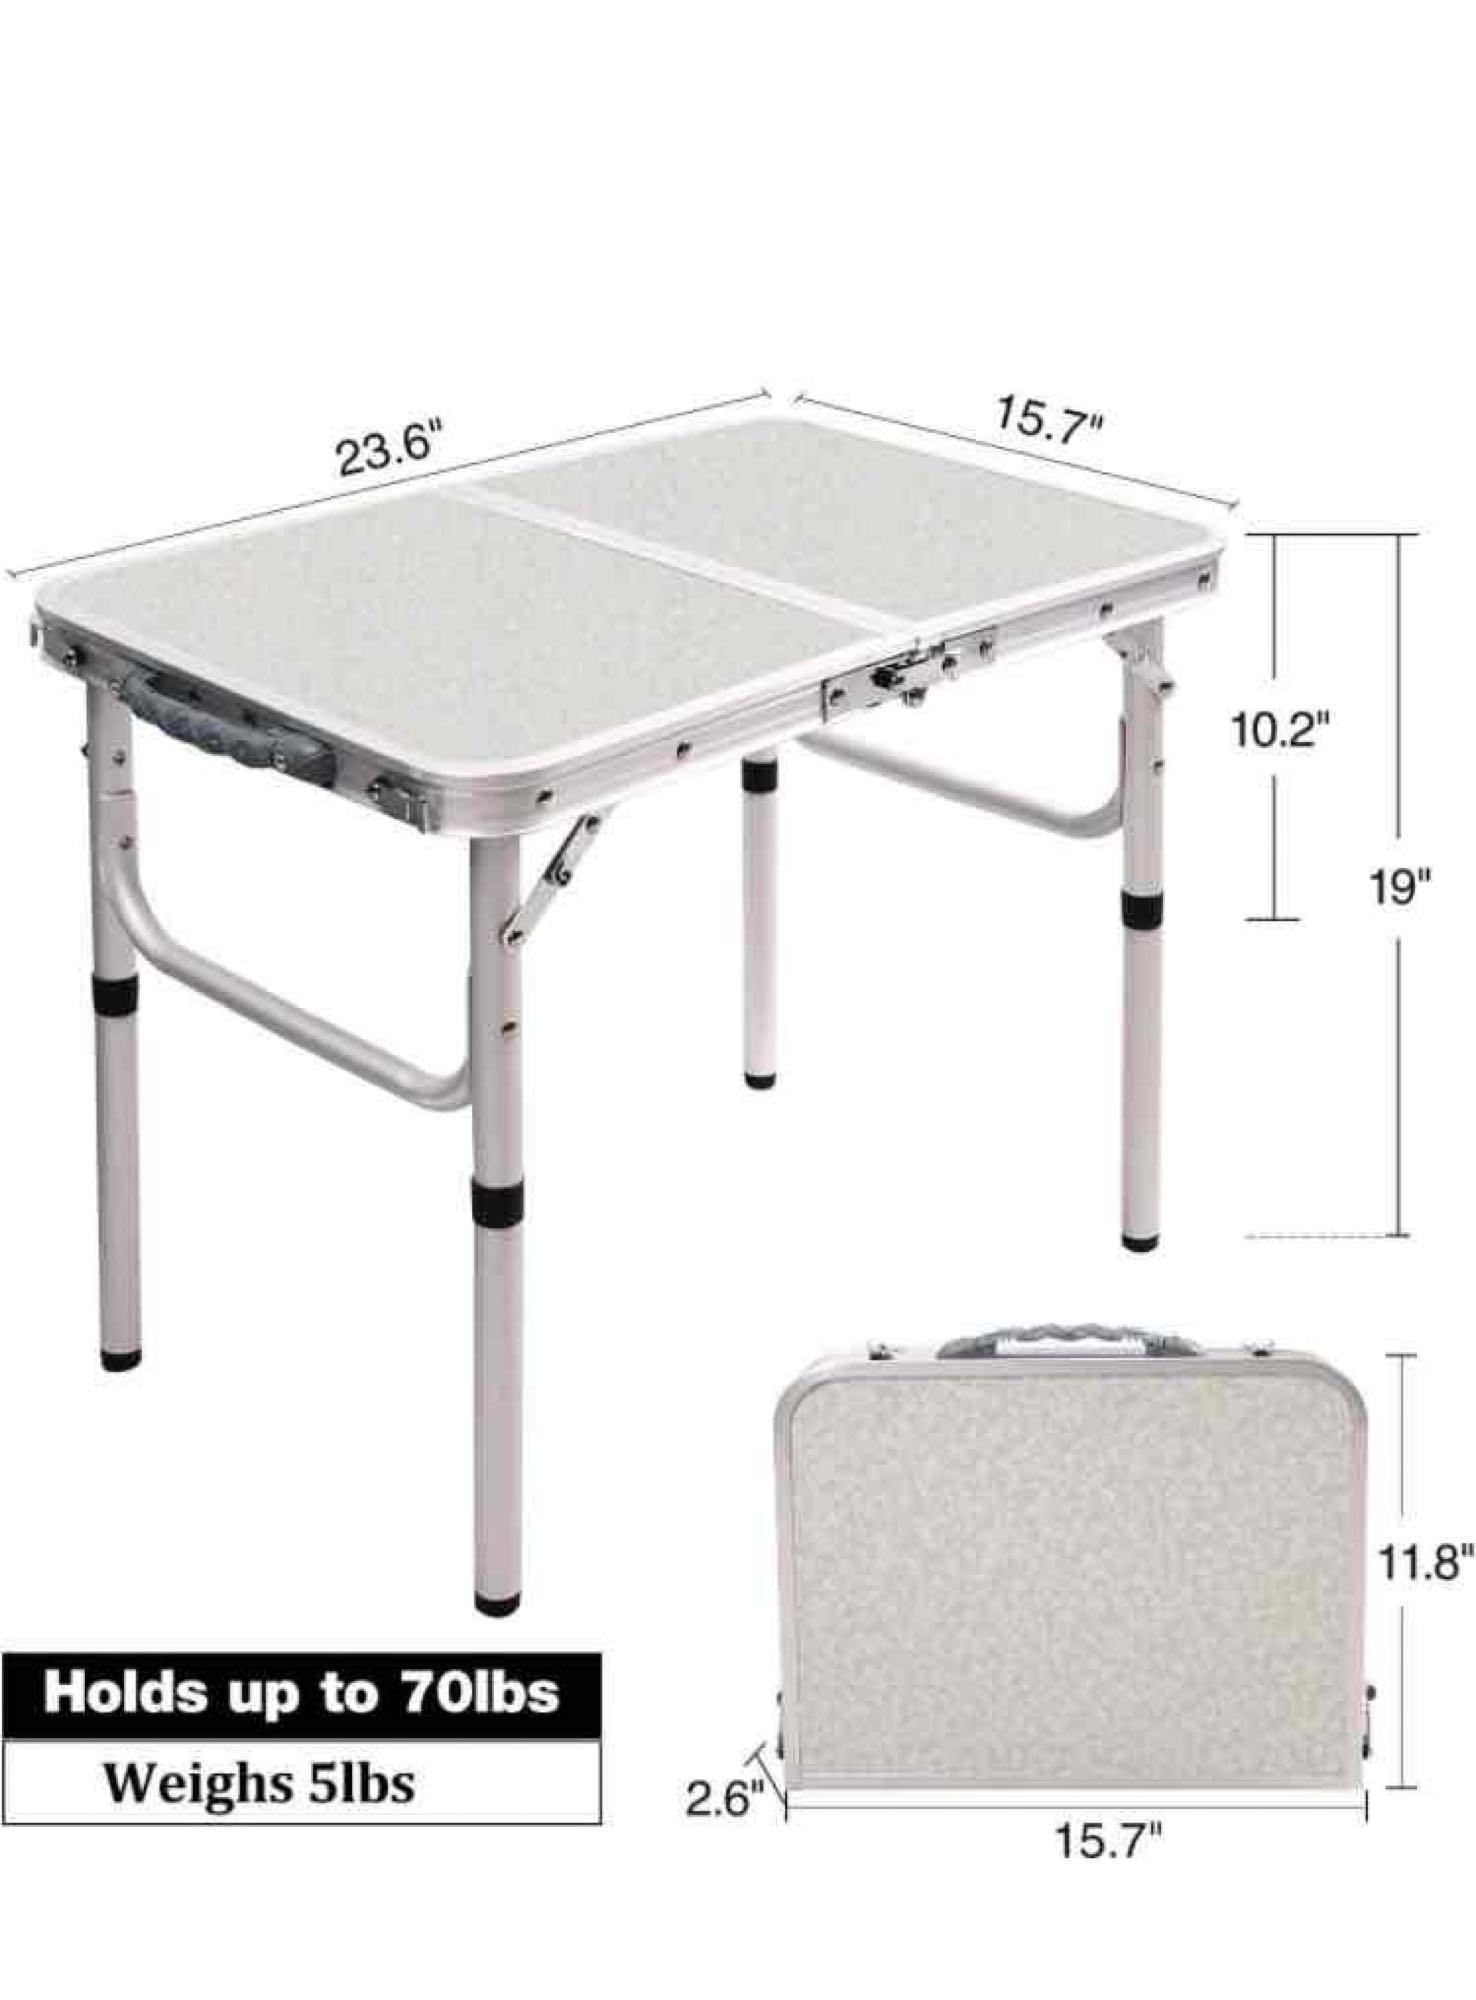 RedSwing Small Folding Table Portable 2 Feet, Small Foldable Table Adjustable Height, Lightweight